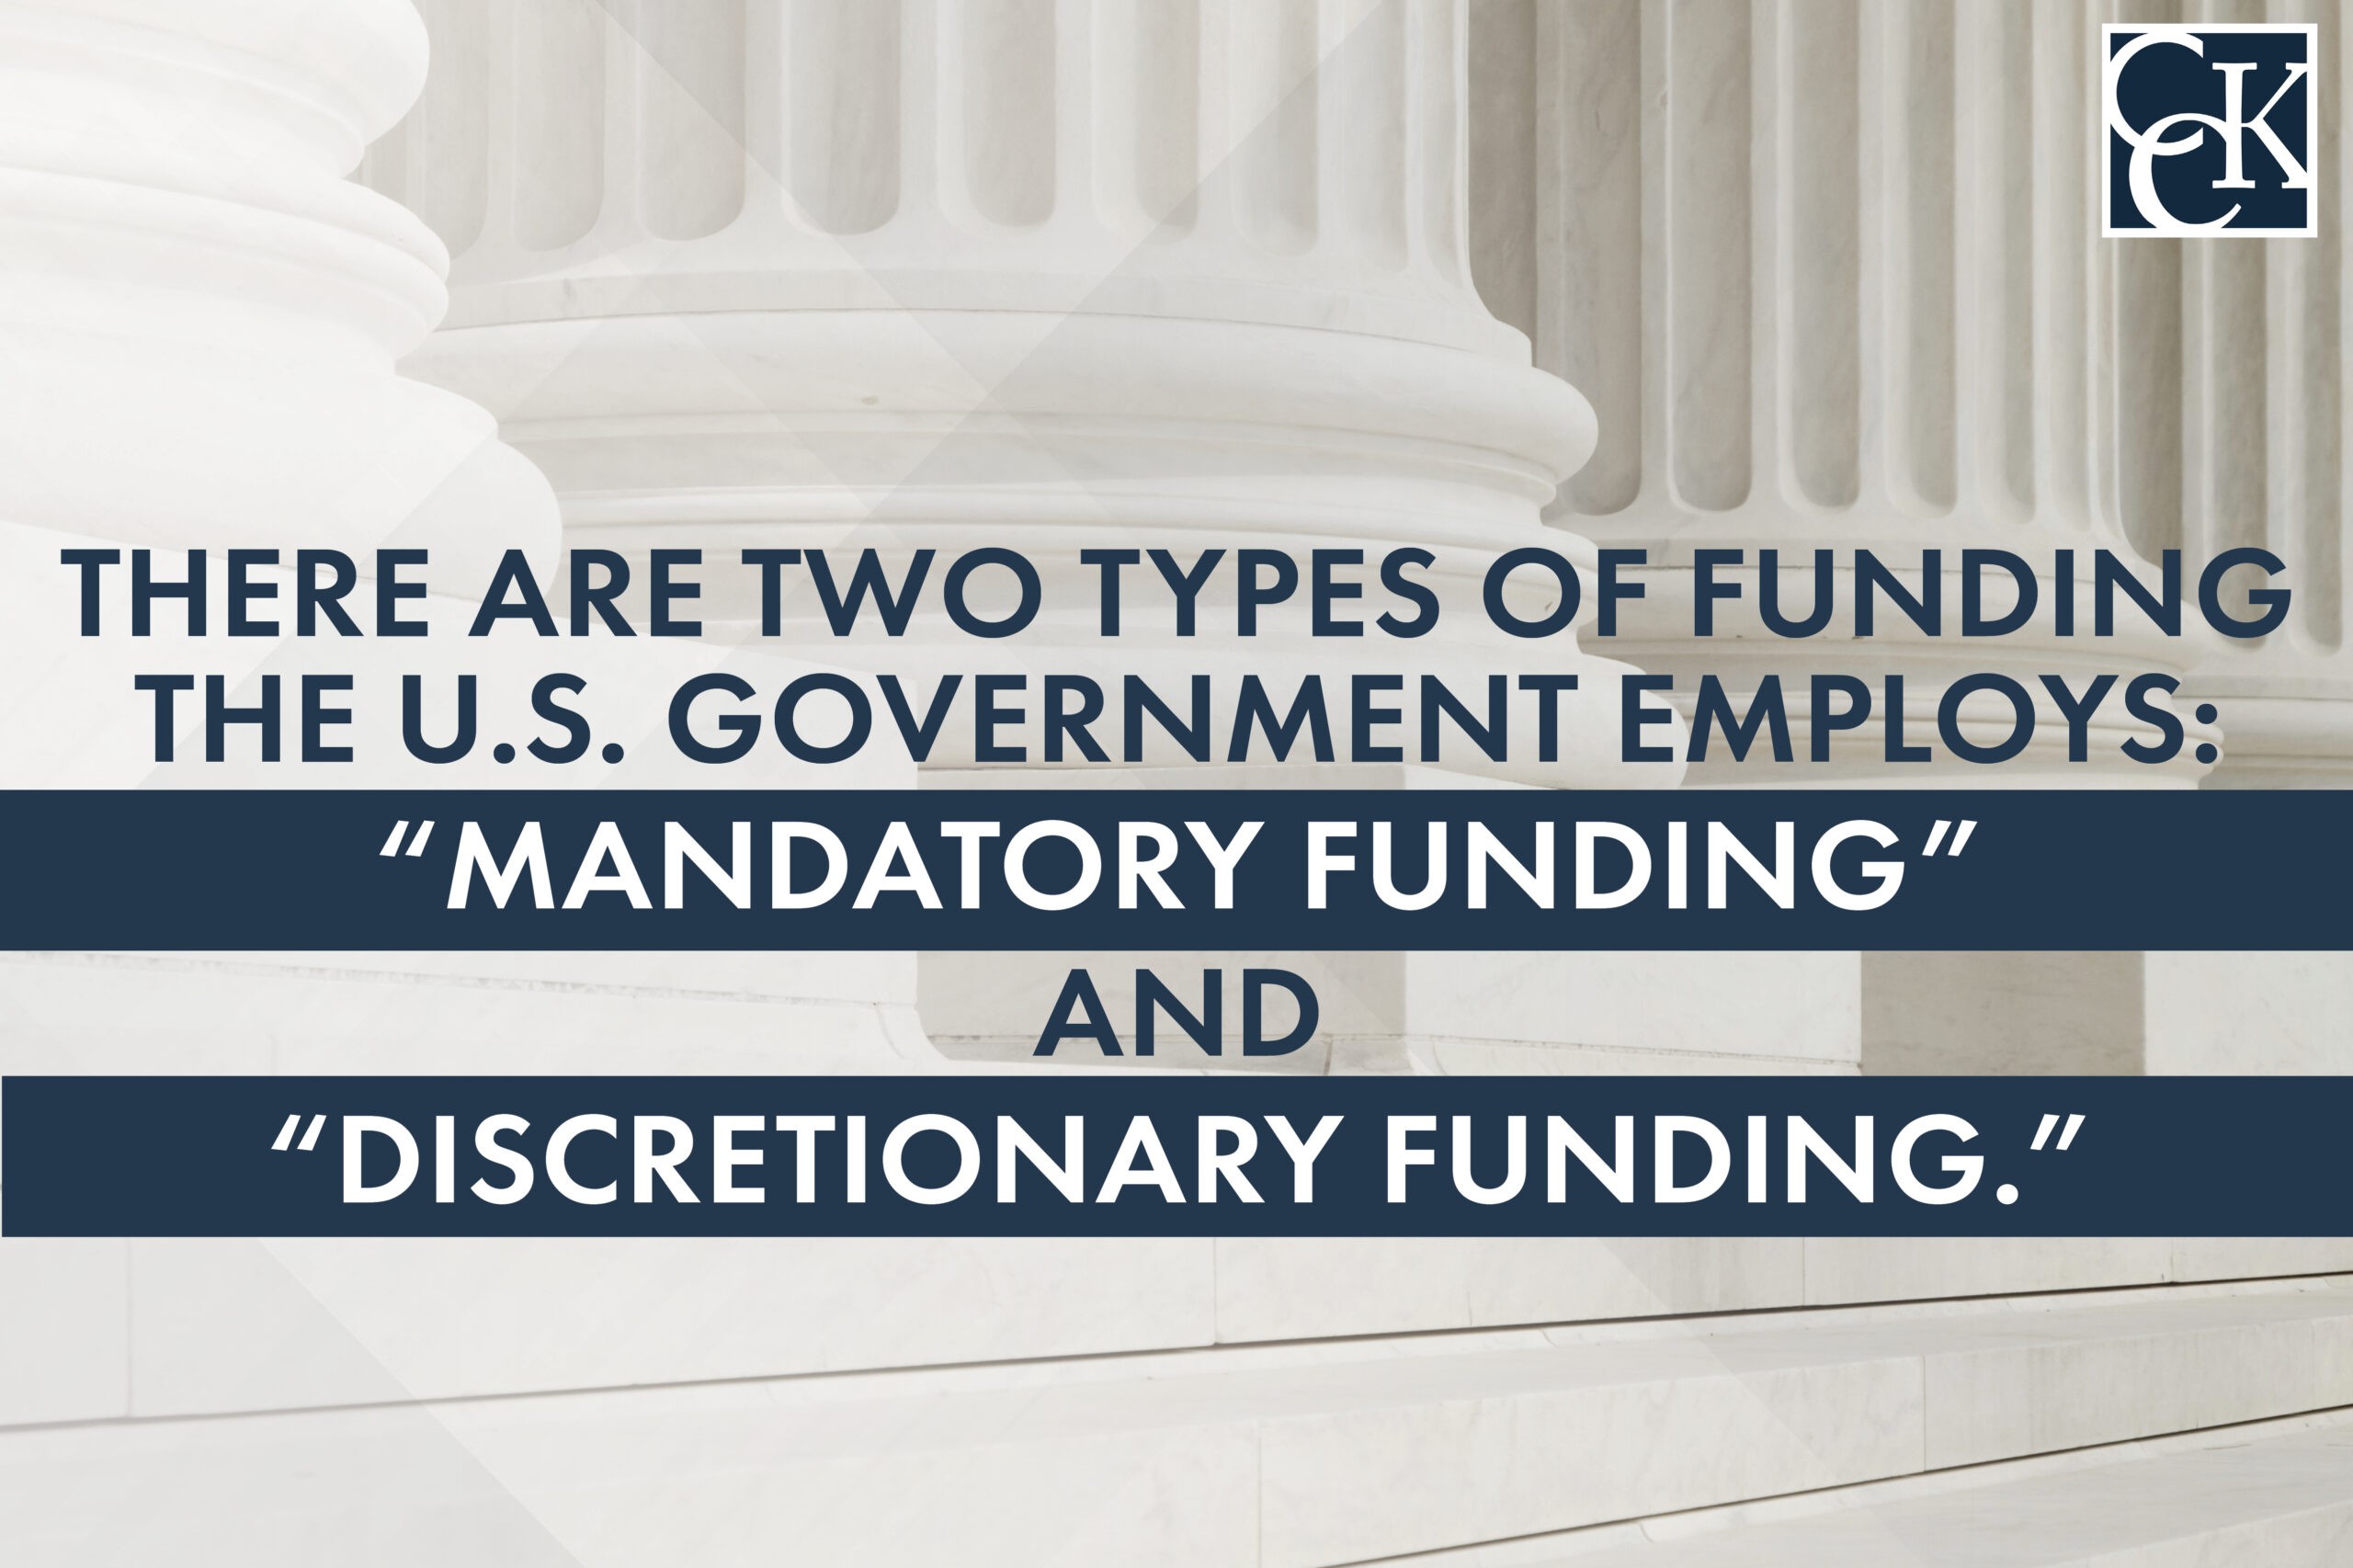 There are two types of funding the U.S. Government employs: "Mandatory Funding" and "Discretionary Funding."